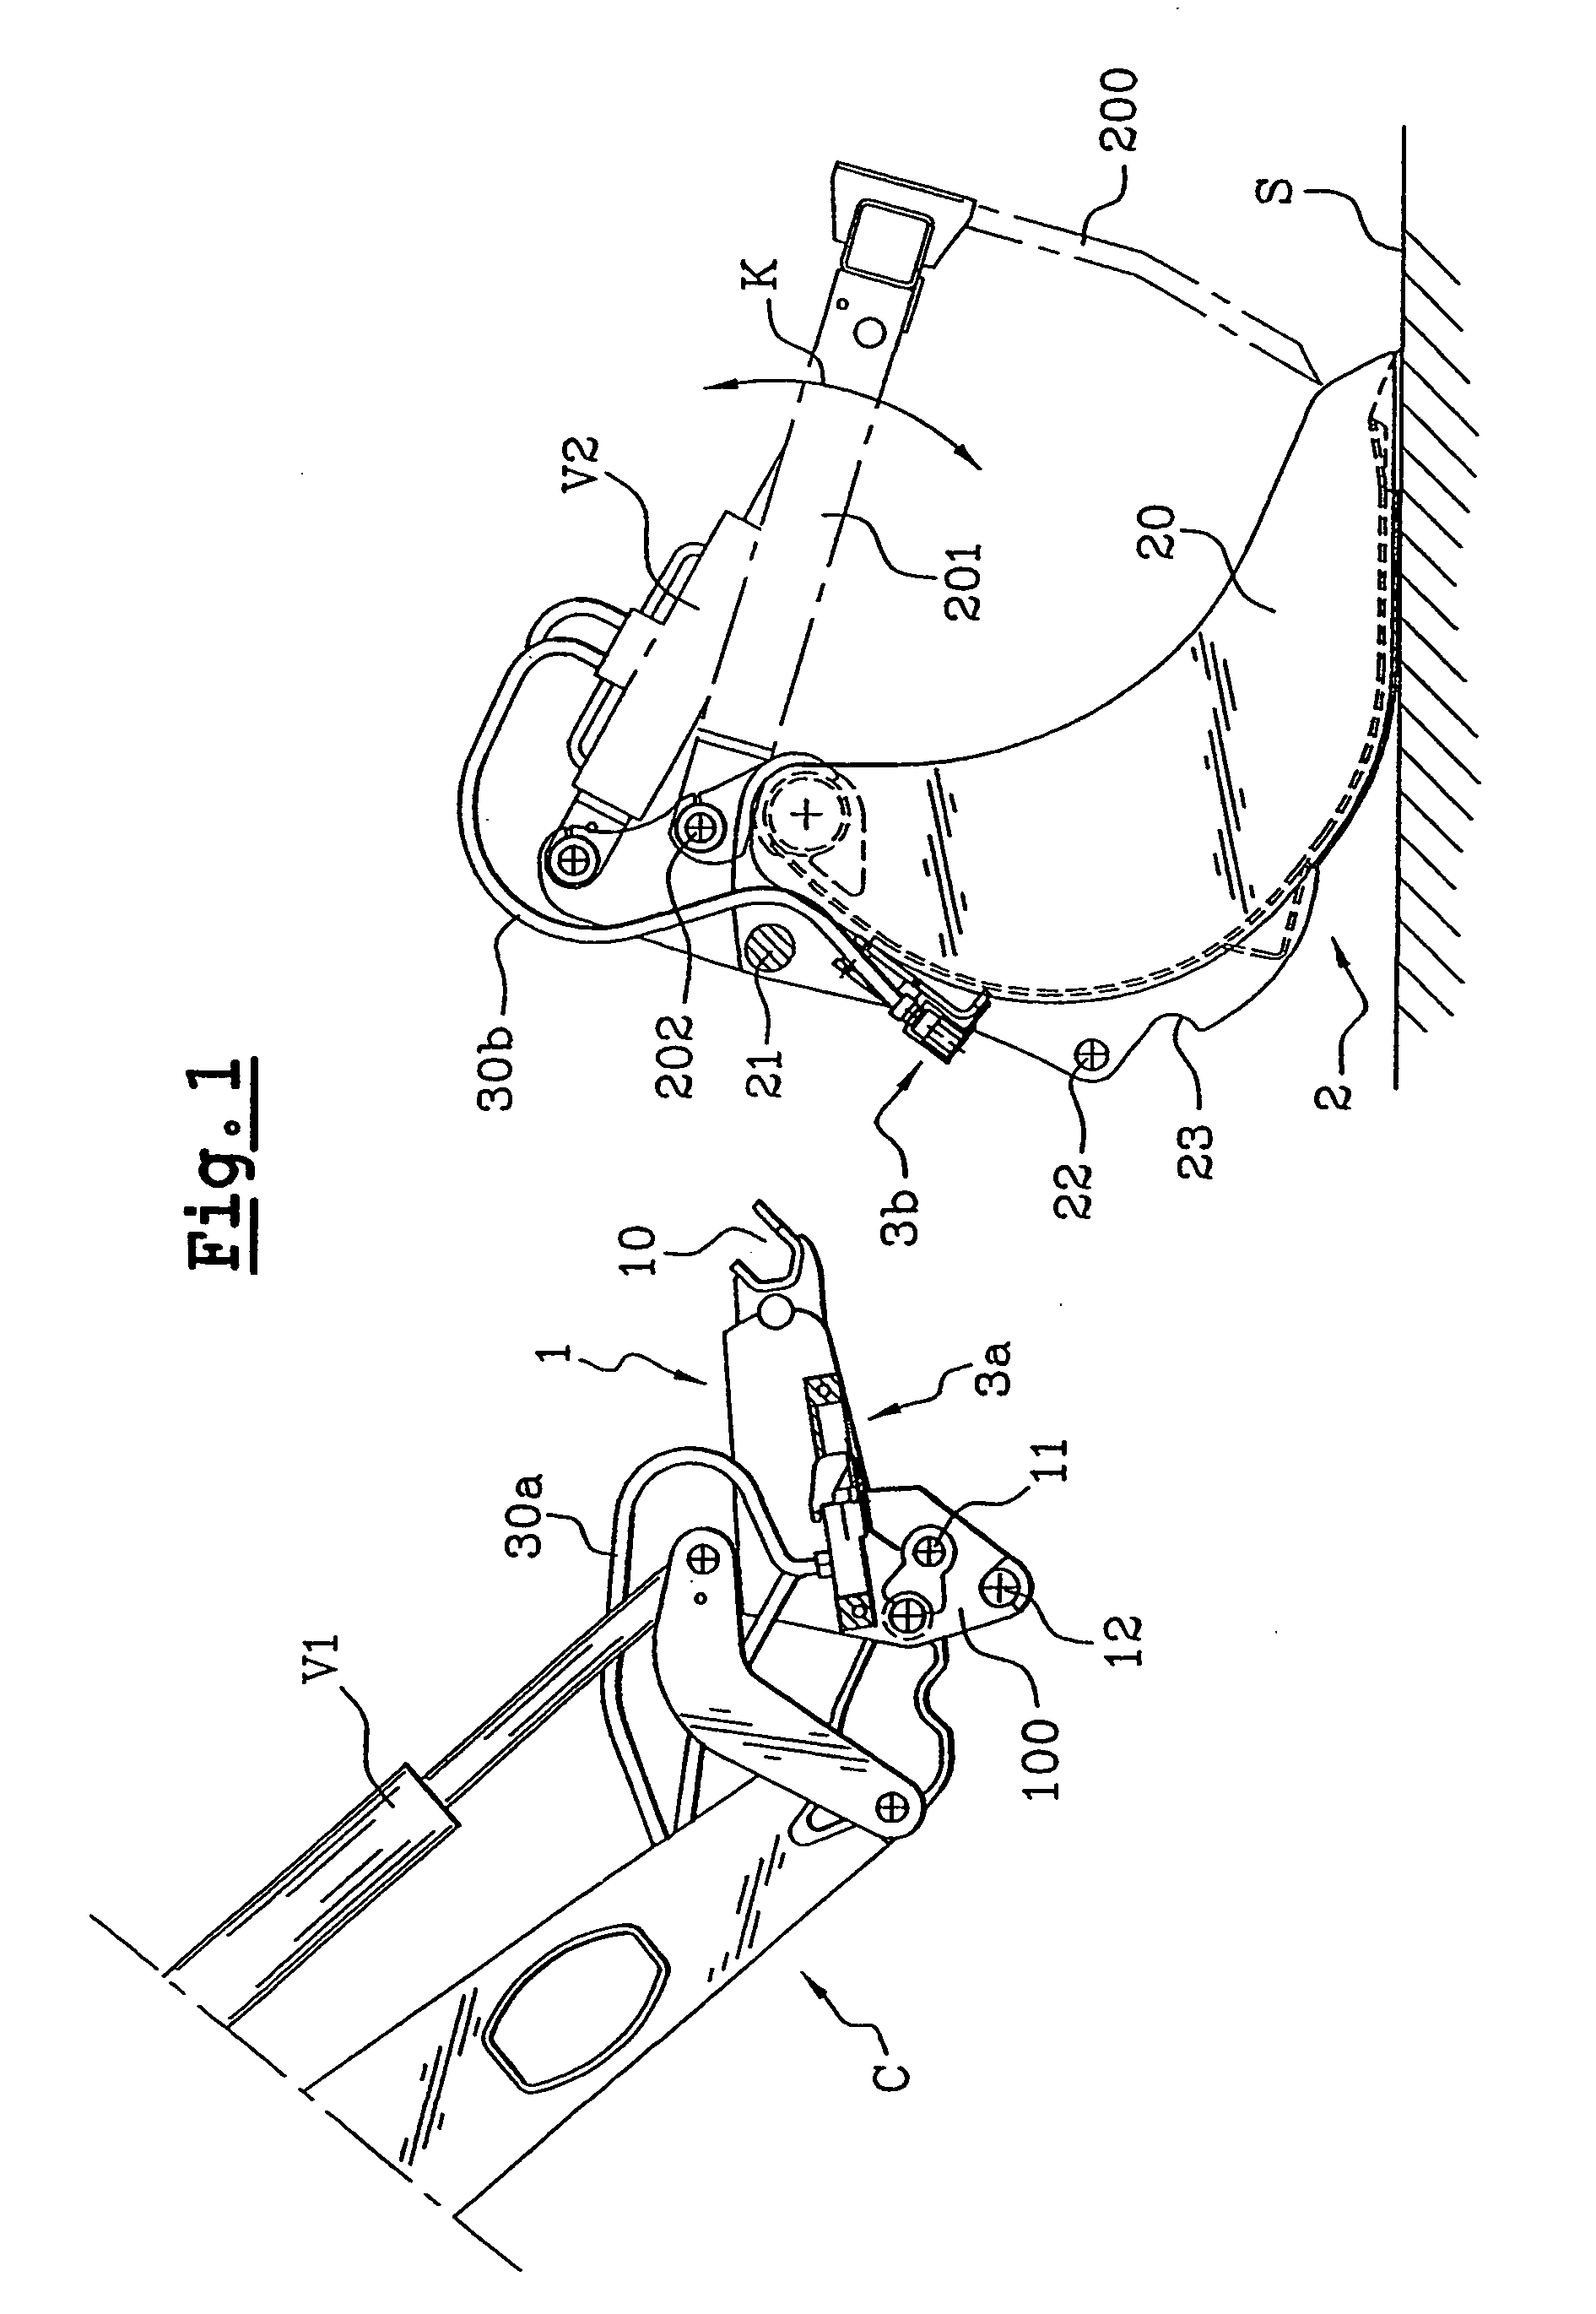 Method and a system for establishing mechanical and multiple-fluid couplings between a tool and a tool-carrier frame